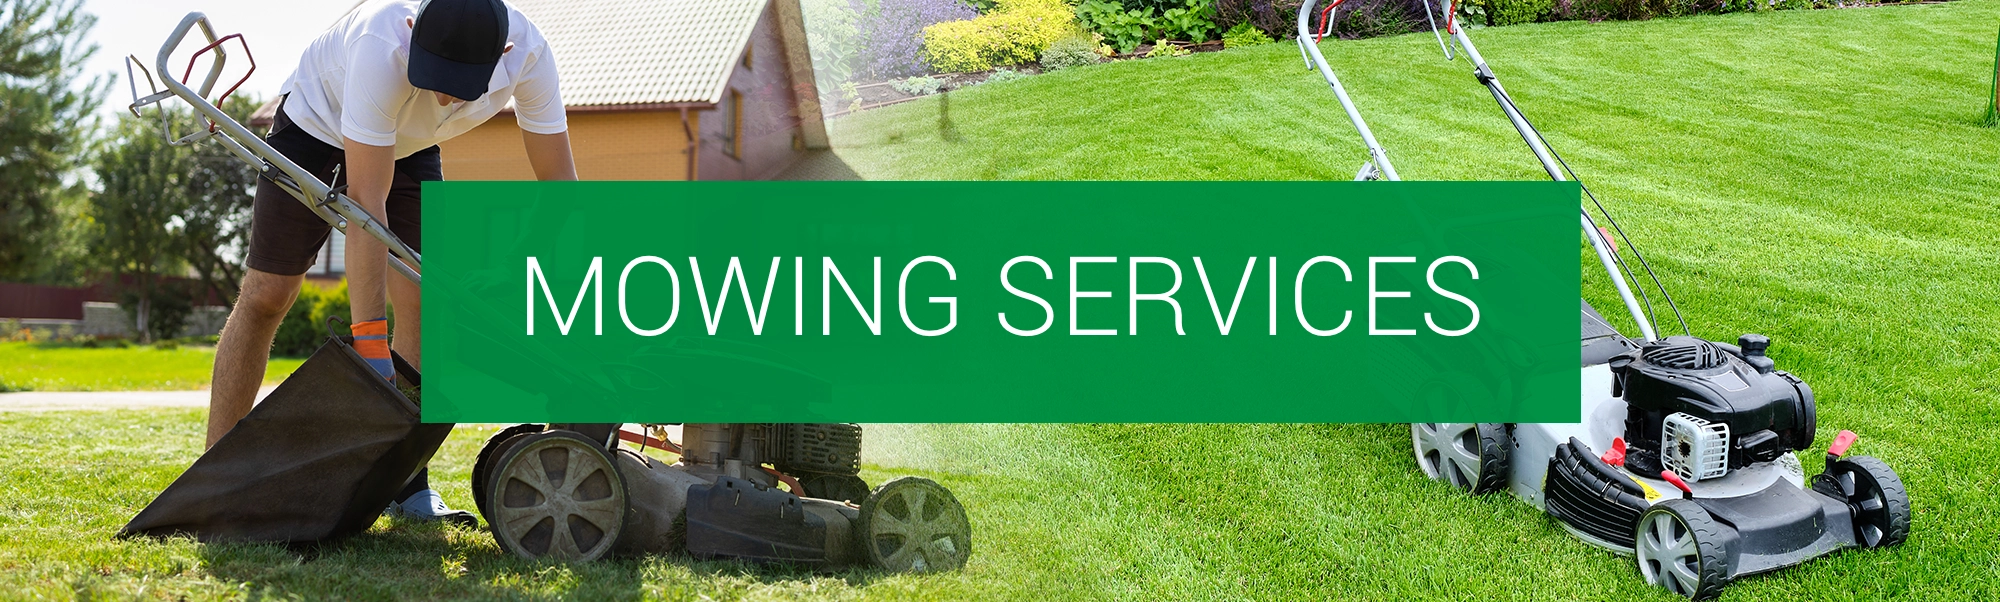 Lawn Care Services in  - Mowing